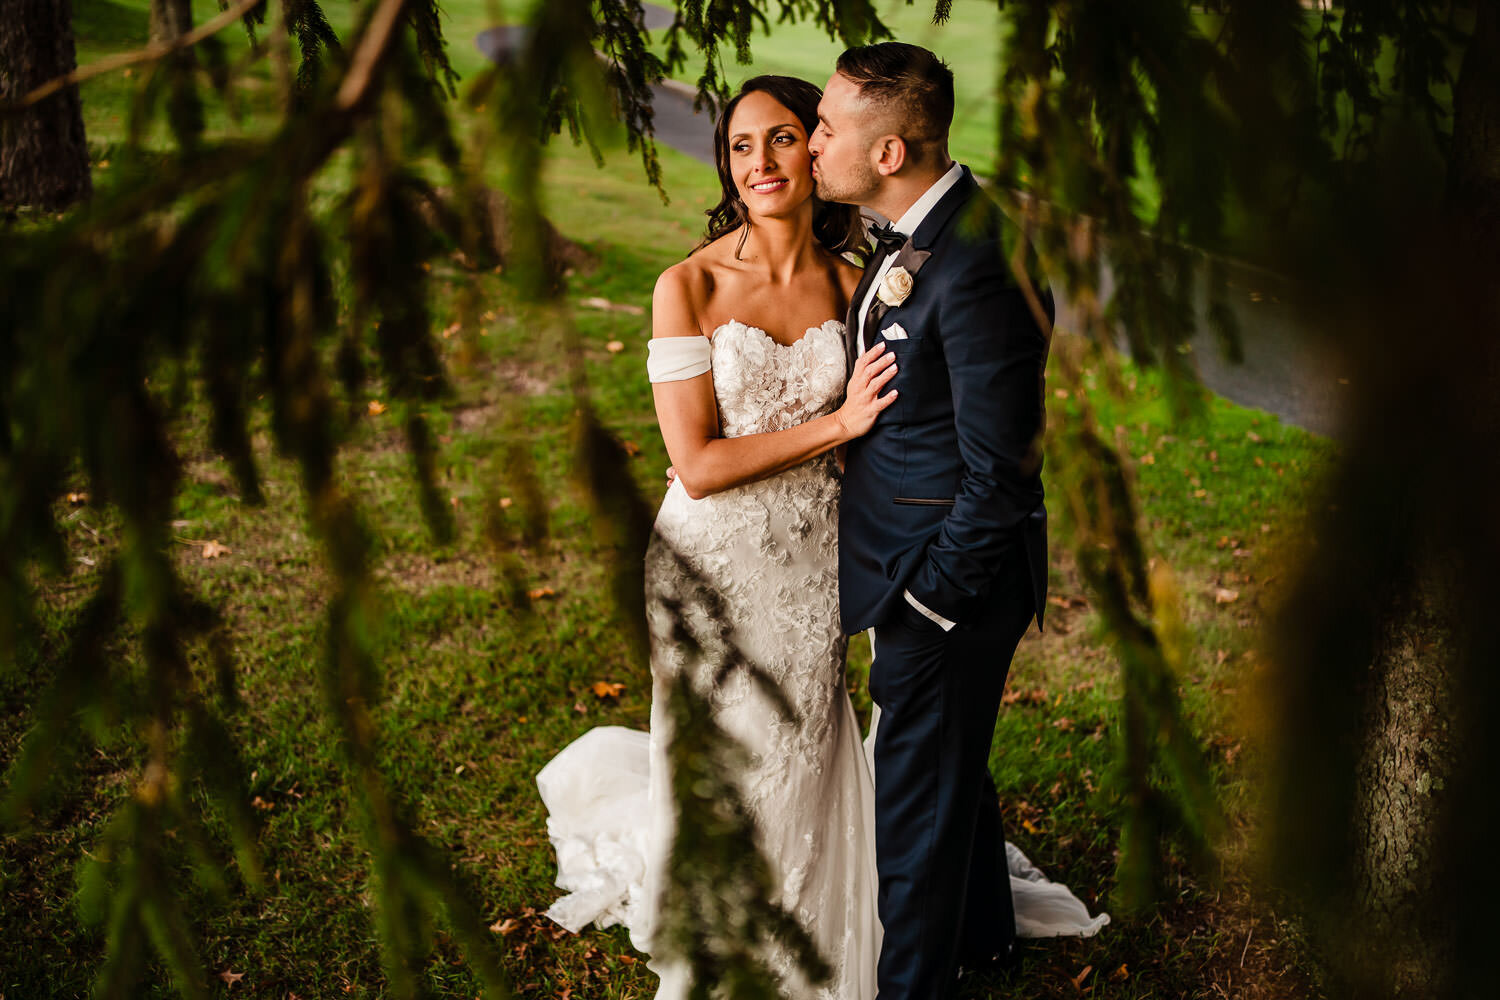 Bride and groom portrait through the trees at Royalton on the Gr